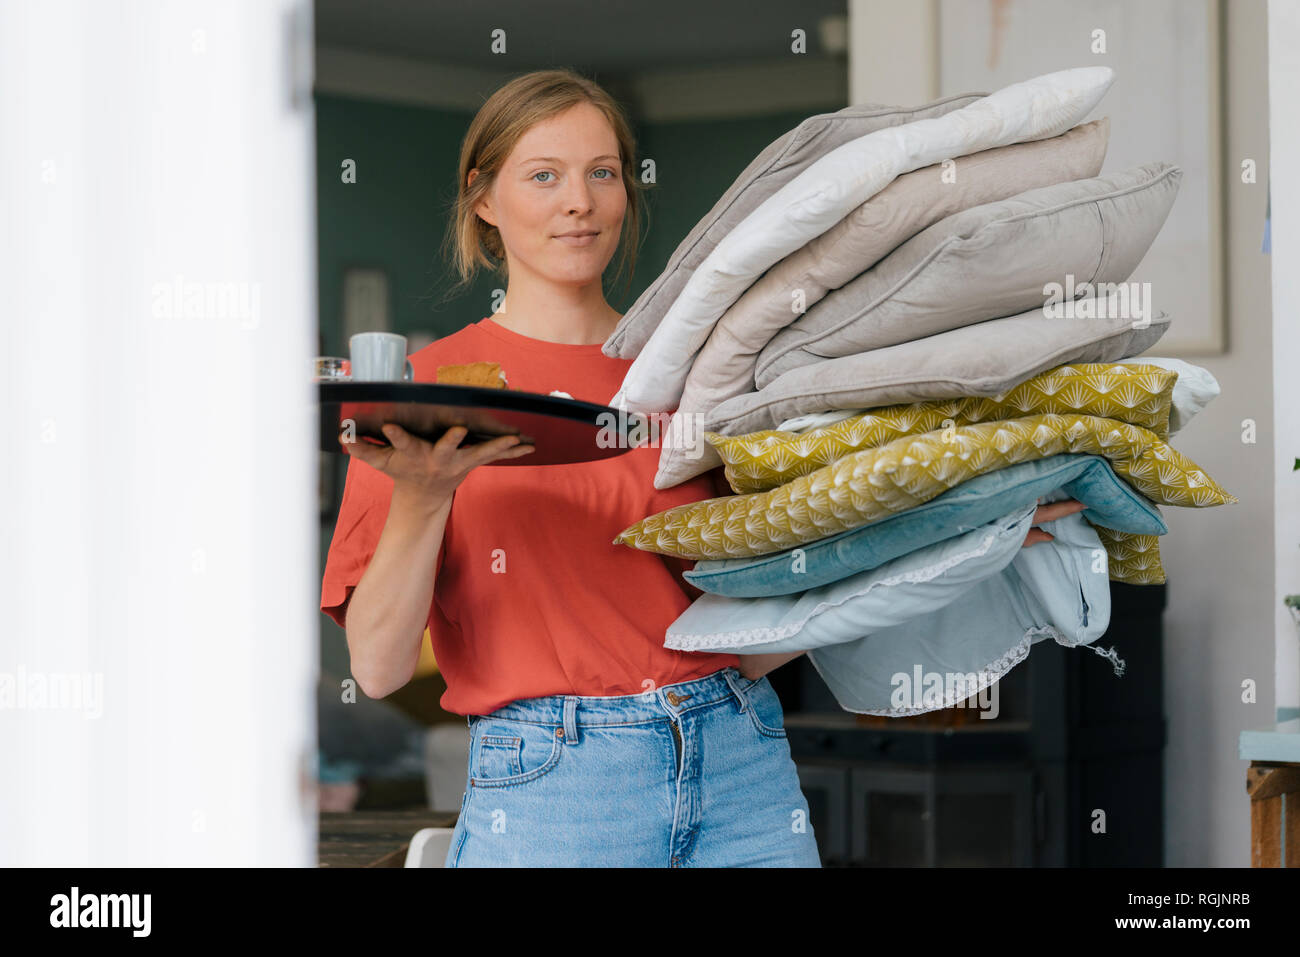 Portrait of young woman holding tray and cushions in a cafe Stock Photo